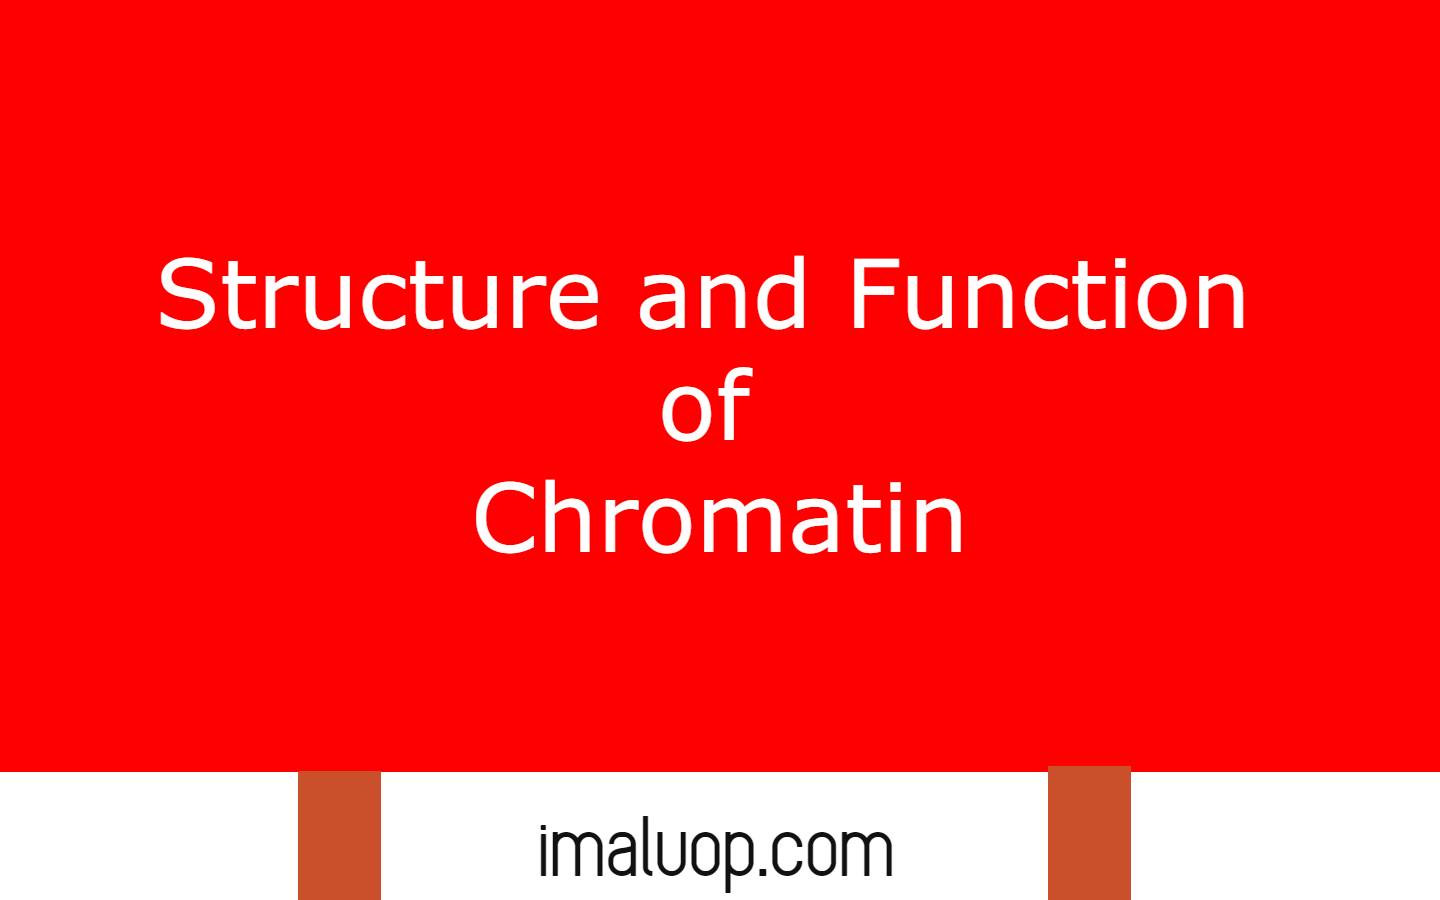 Structure and Function of Chromatin